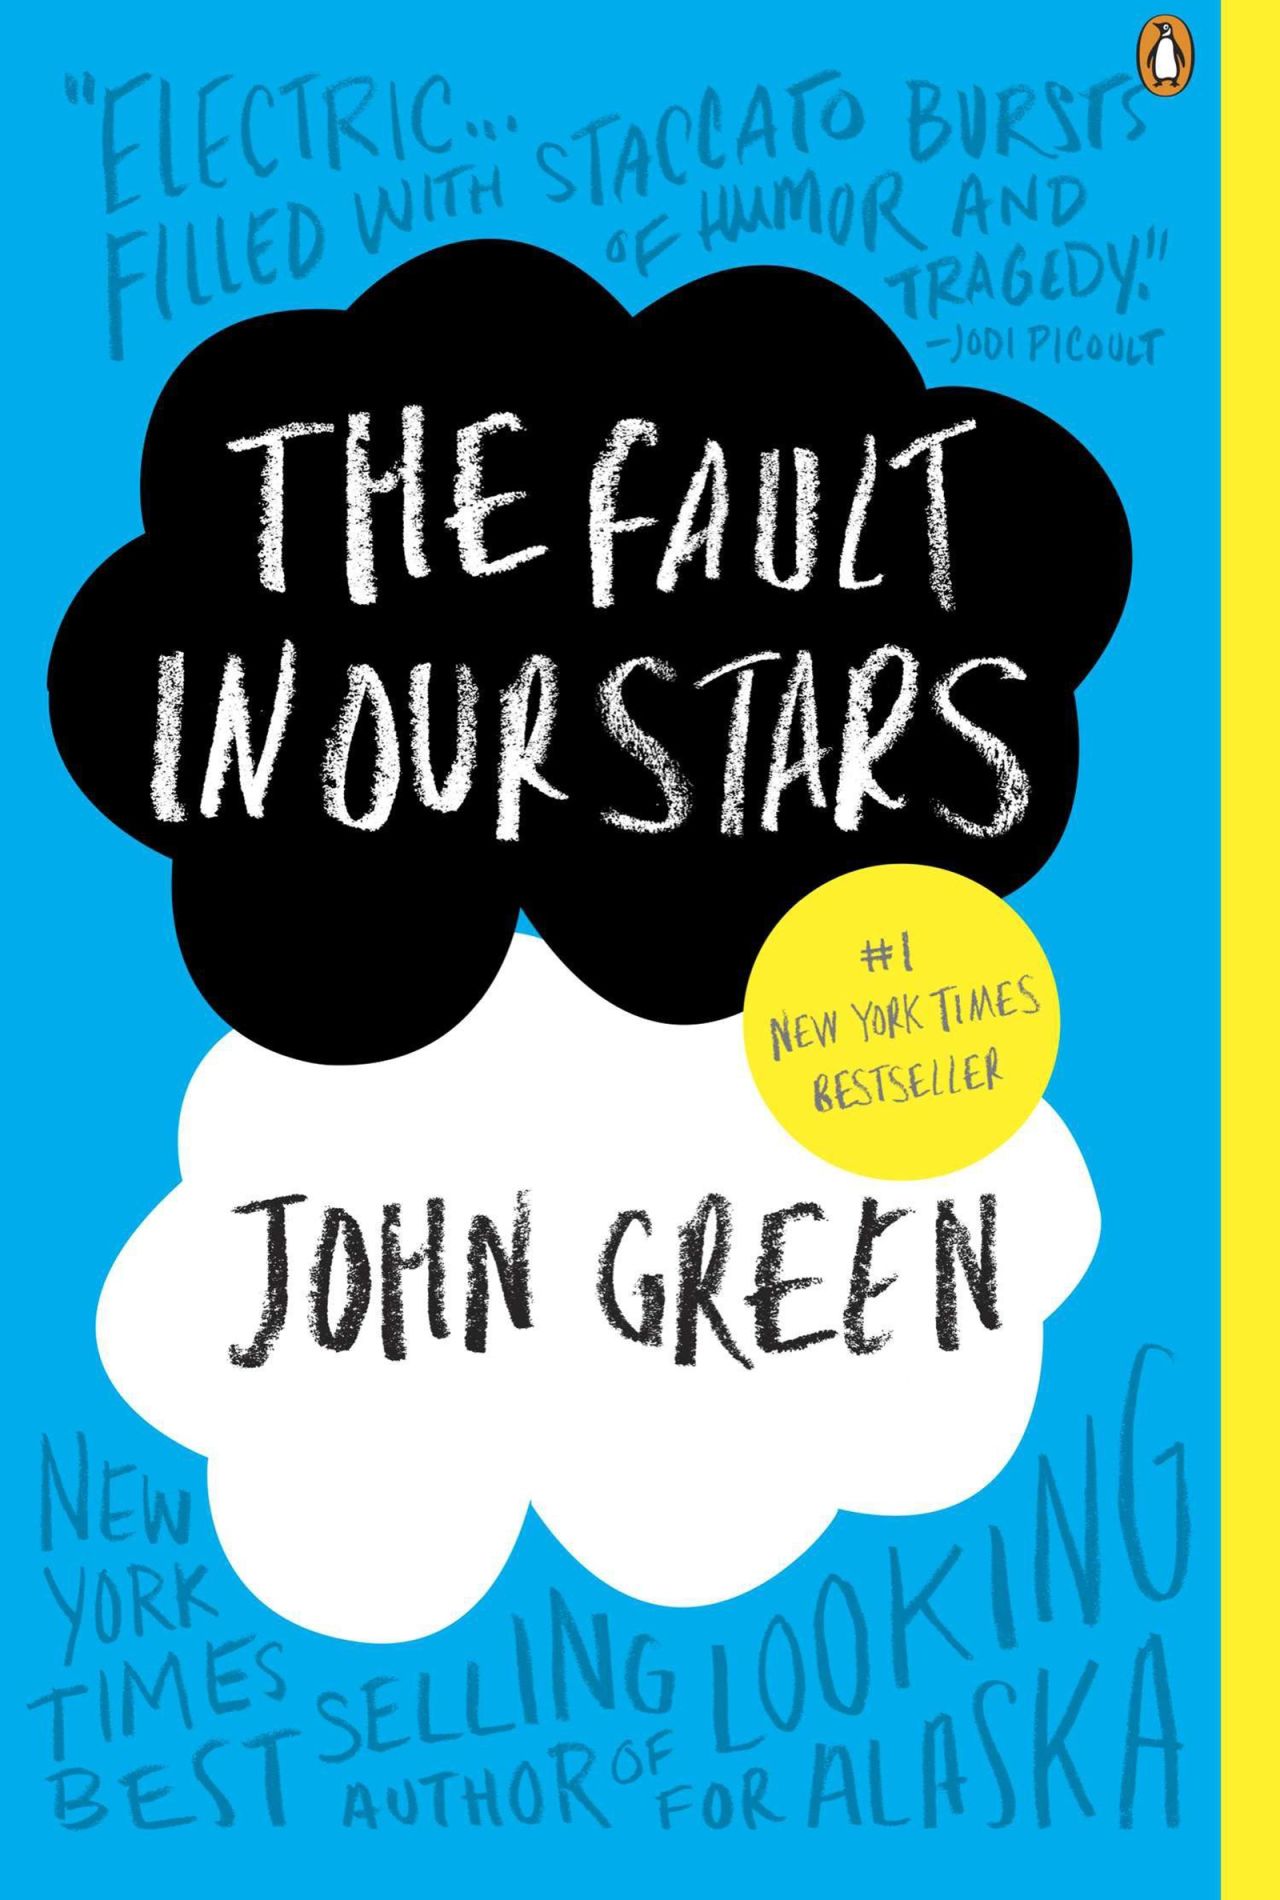 "The Fault in Our Stars" by John Green dives into the themes of love, loss and mortality, featuring teen protagonists living with cancer.